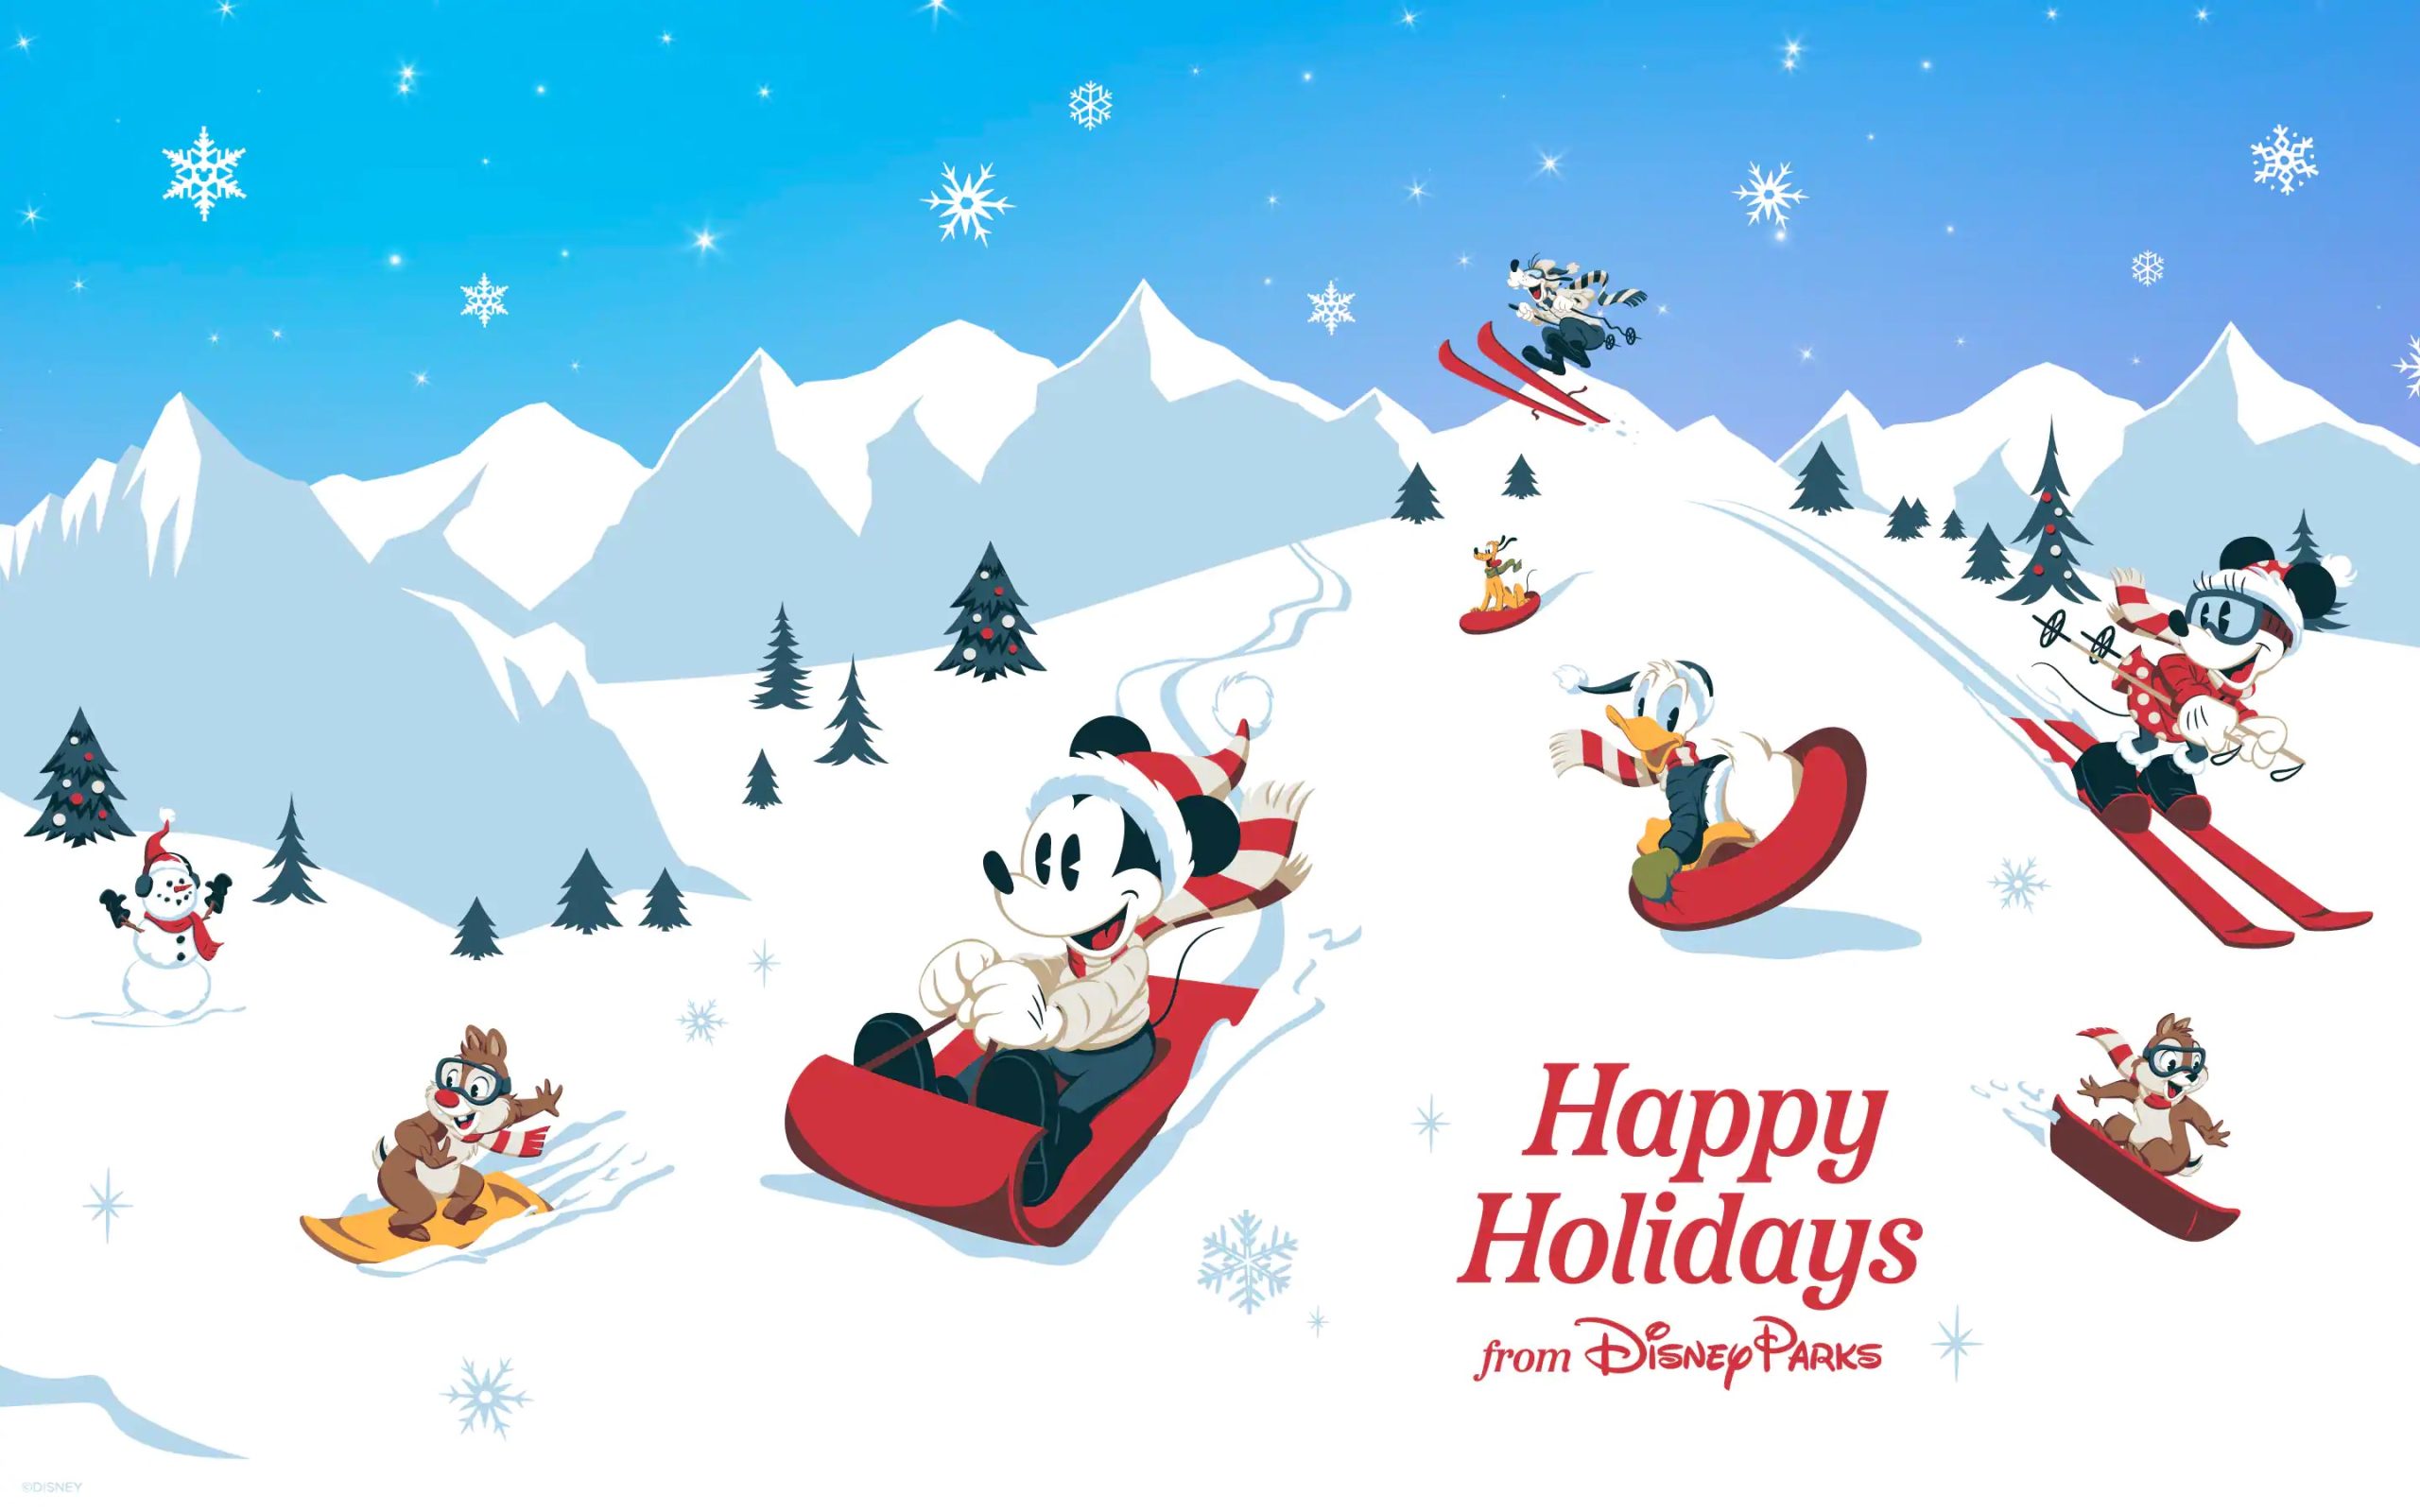 Merry Christmas Disney Cartoon Pictures Mickey Mouse Minnie Donald Duck  Pluto And Goofy Hd Wallpaper 2560x1600  Wallpapers13com